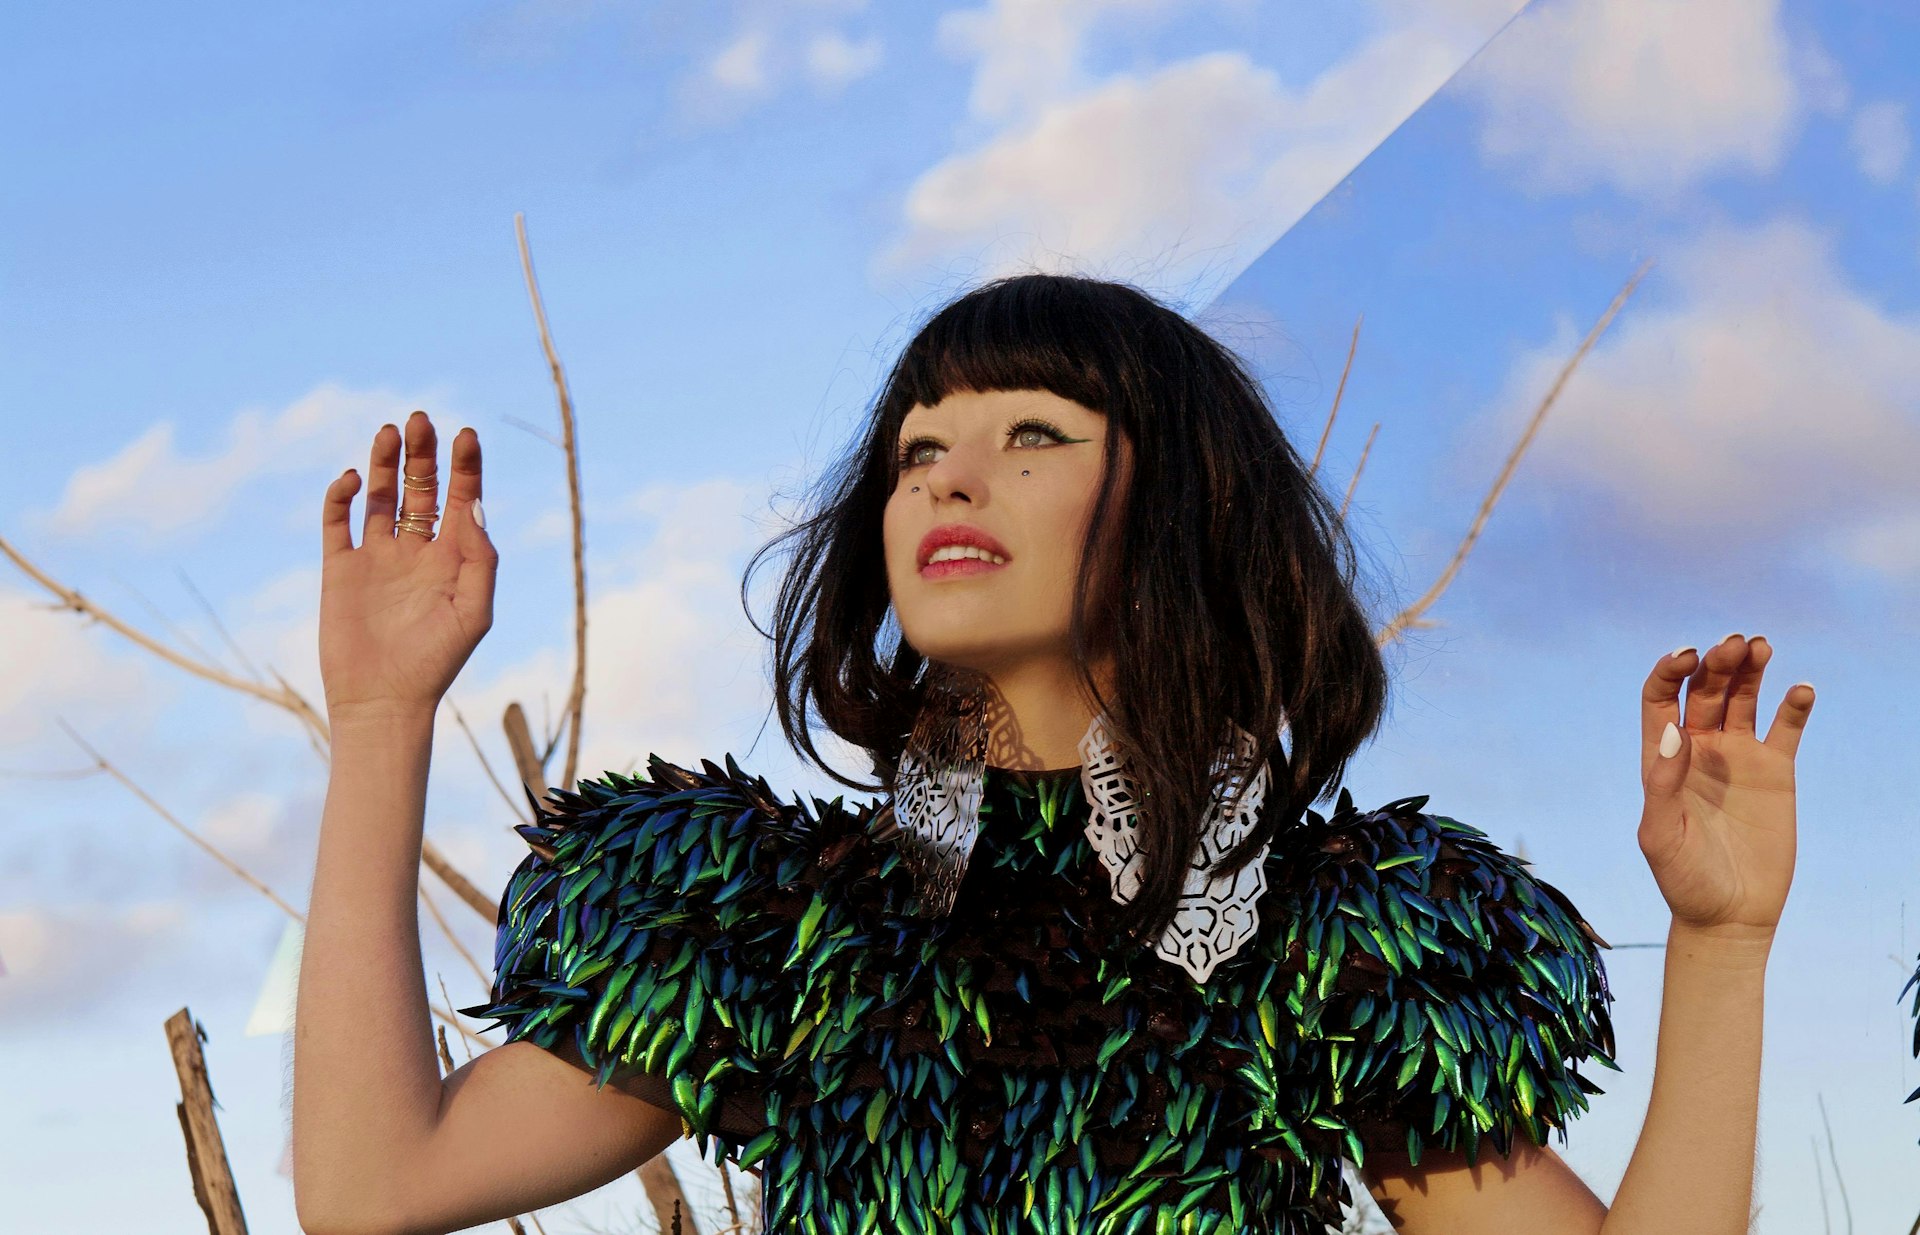 The power of deviation: An interview with Kimbra